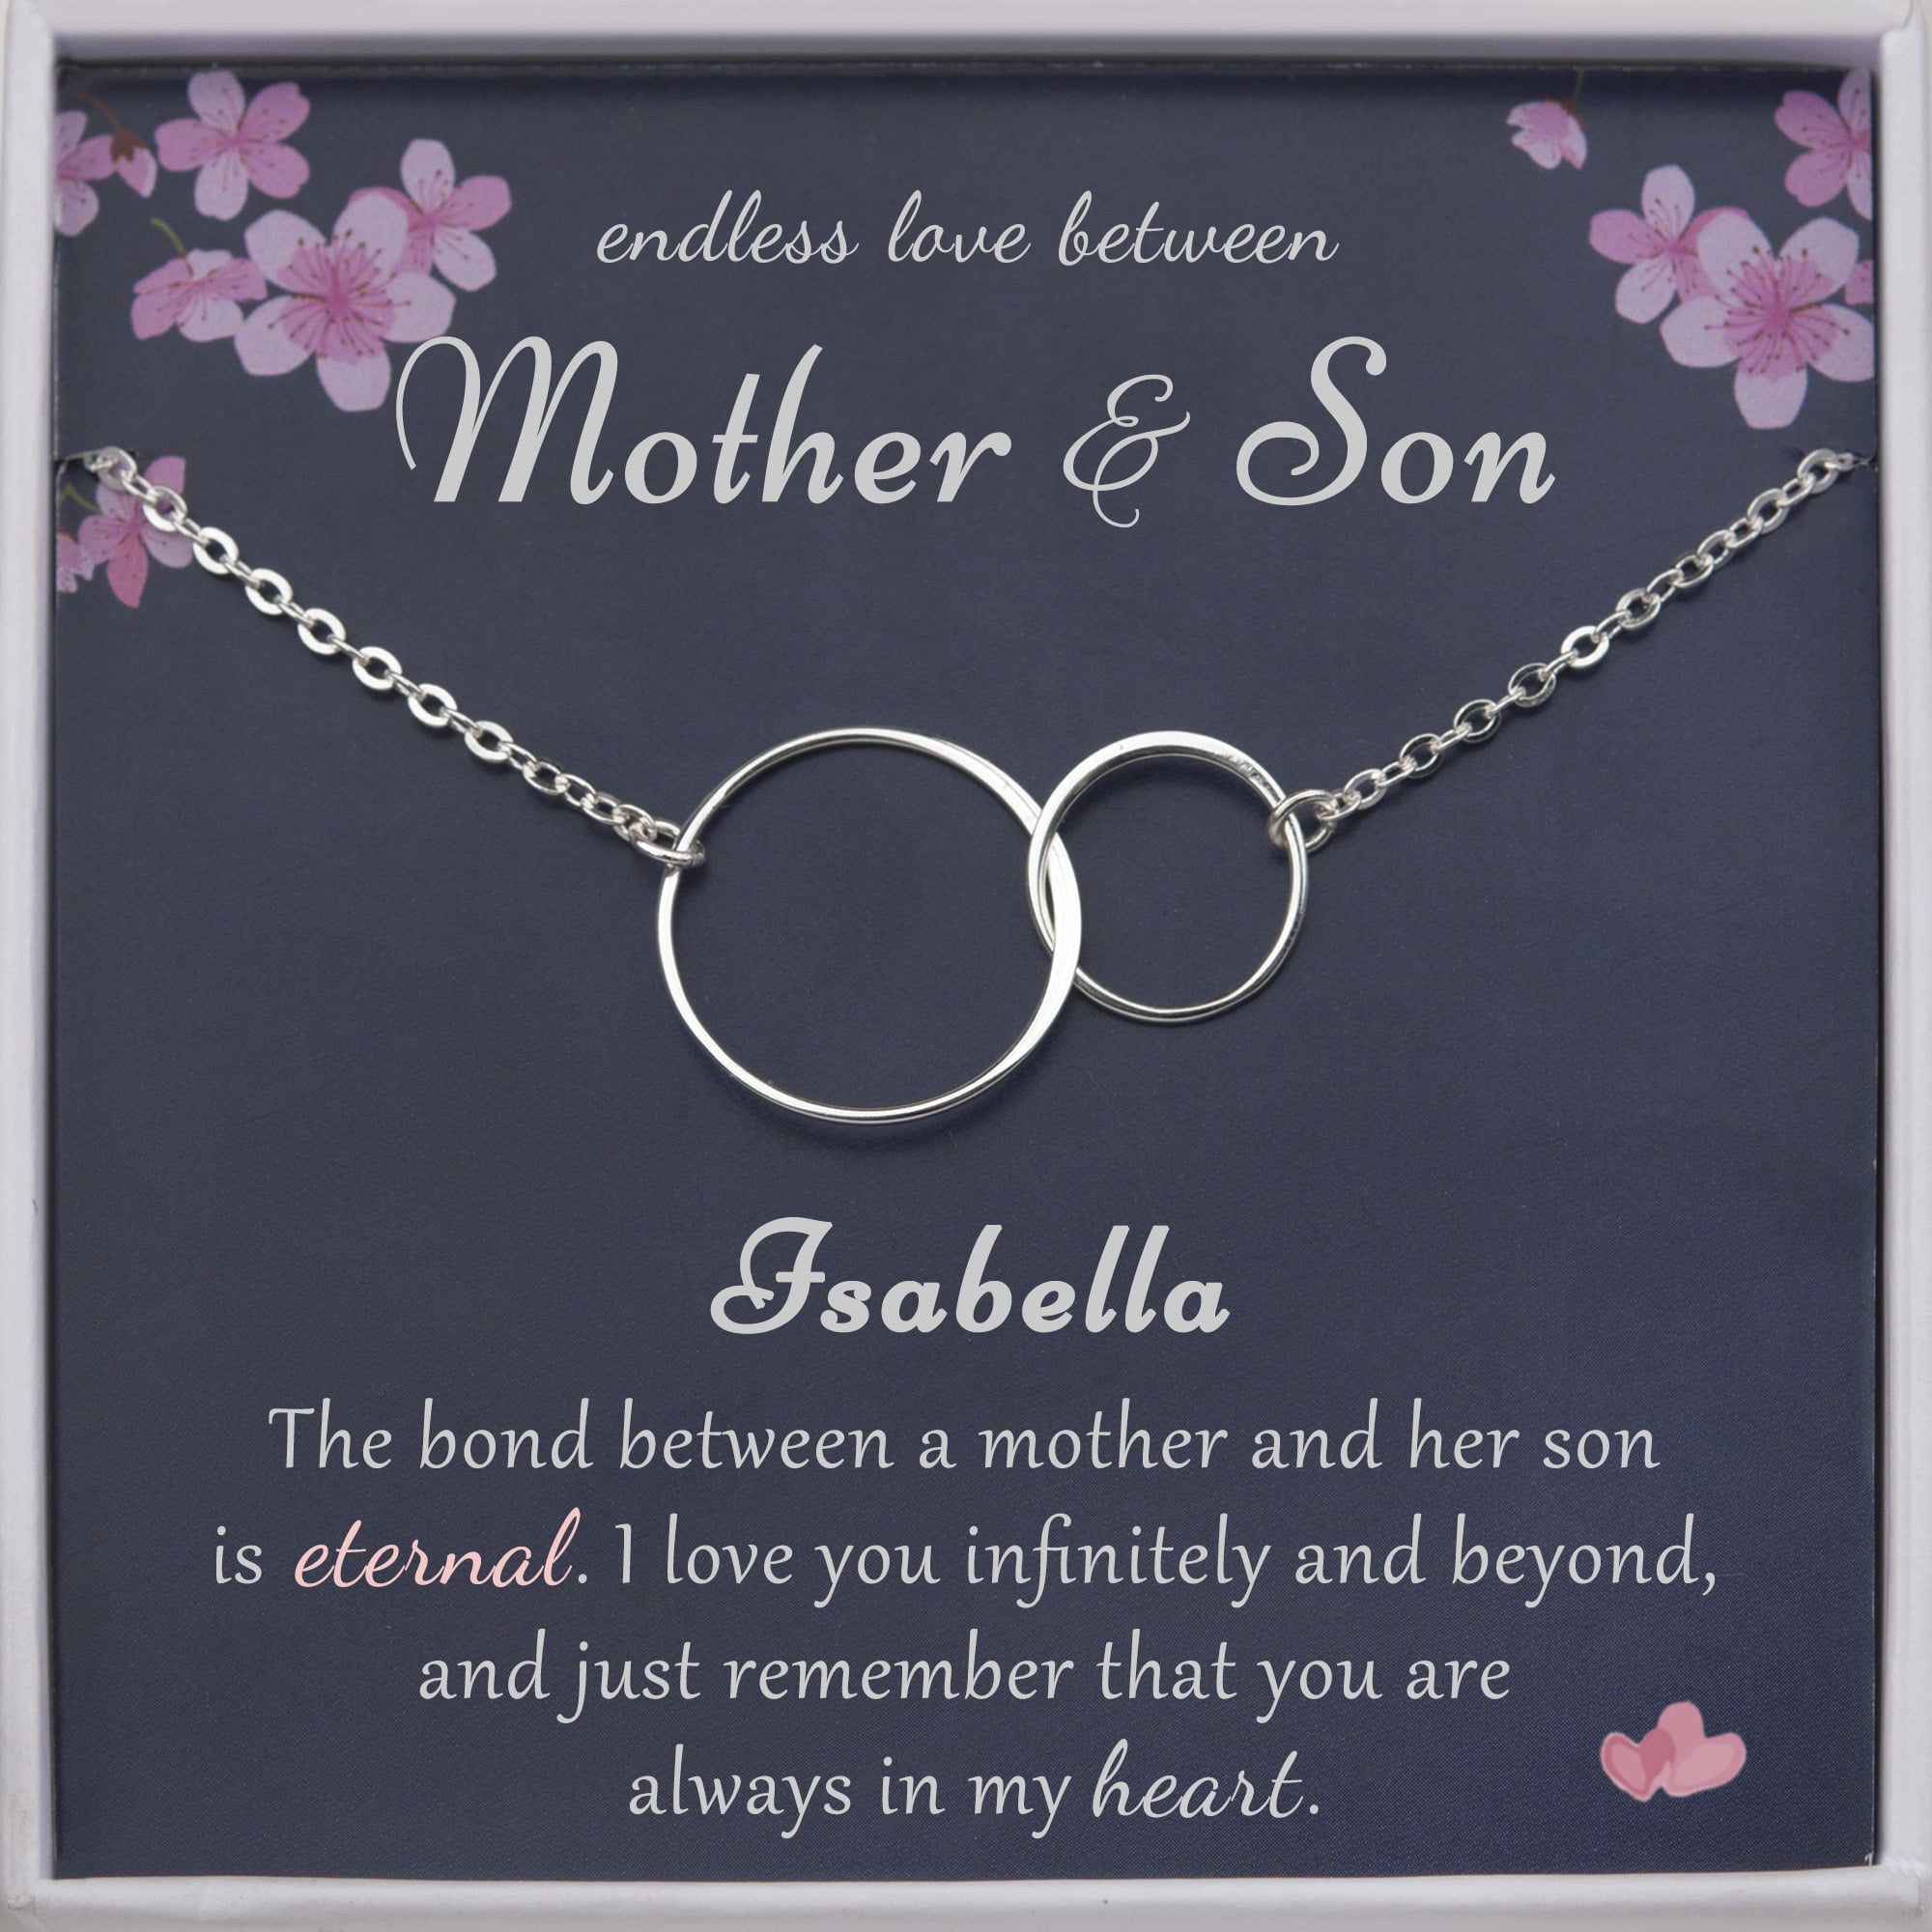 Son Necklace From Mom, Son Gifts From Mom and Dad, Mother and Son Necklace,  Birthday Gift For My Son Graduation Christmas Gifts For Son - P93 |  Amazon.com